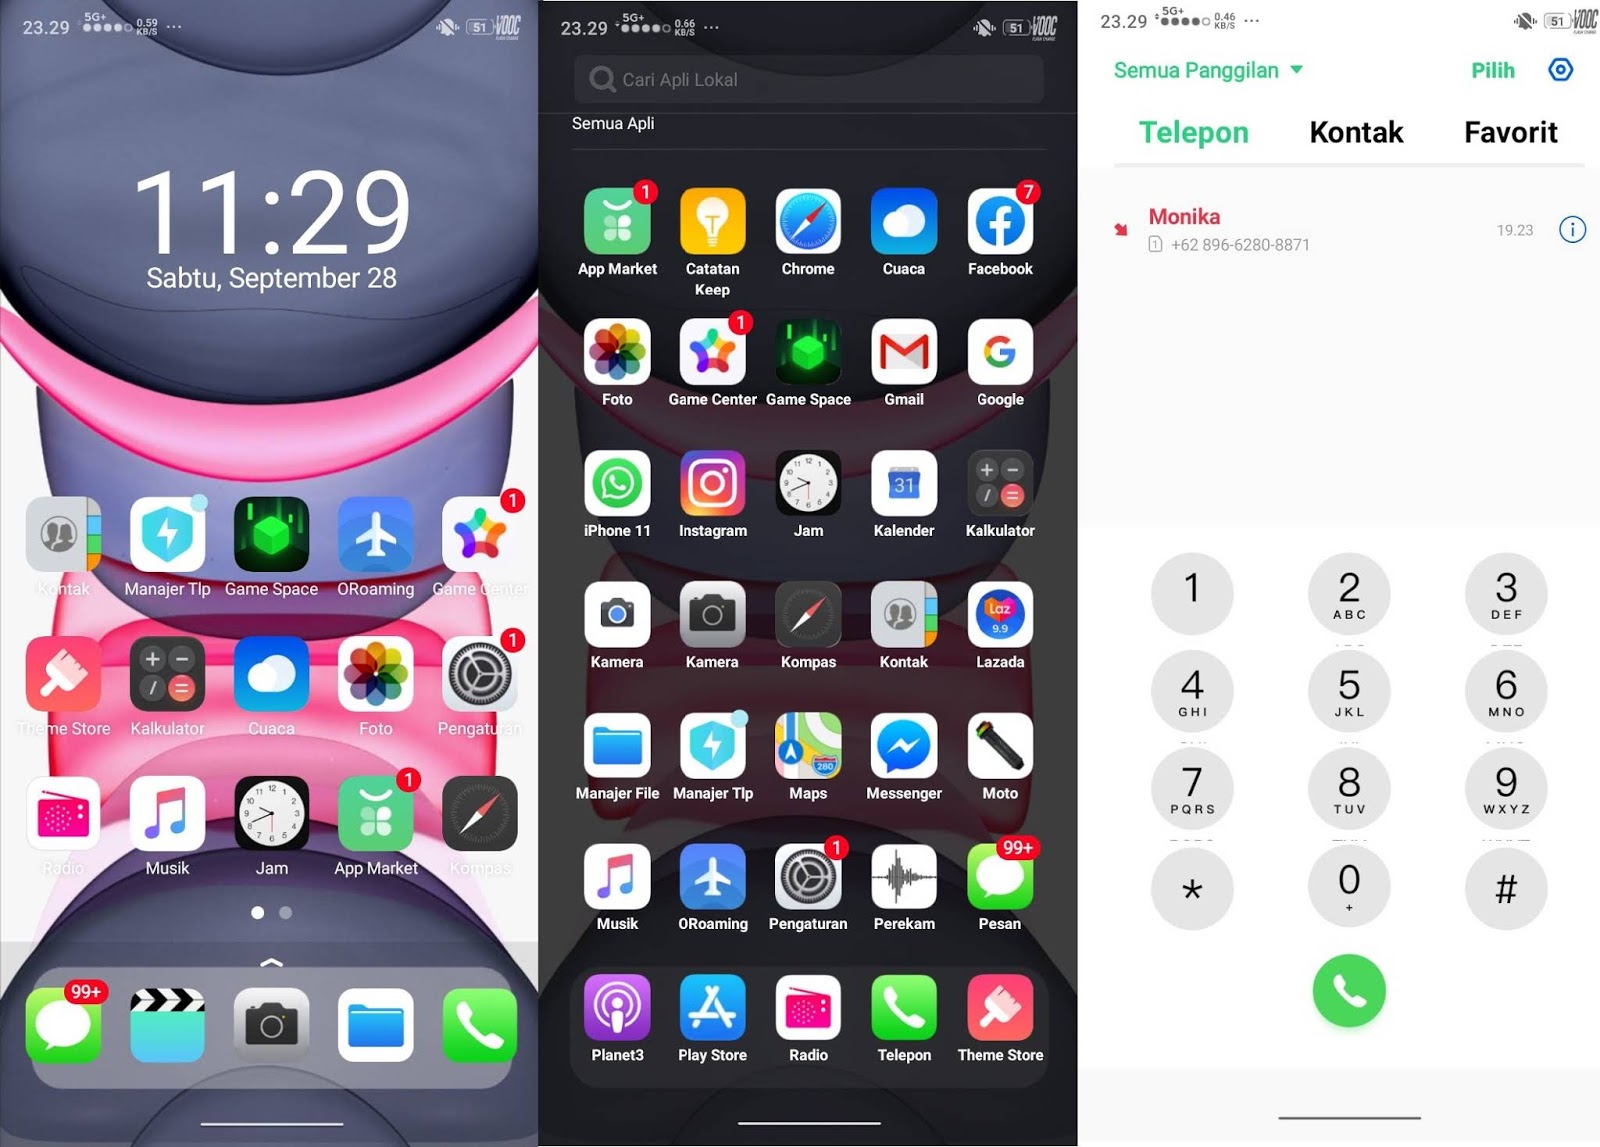 Download Themes iPhone 11 Pro Max 5G+ for OPPO & Realme